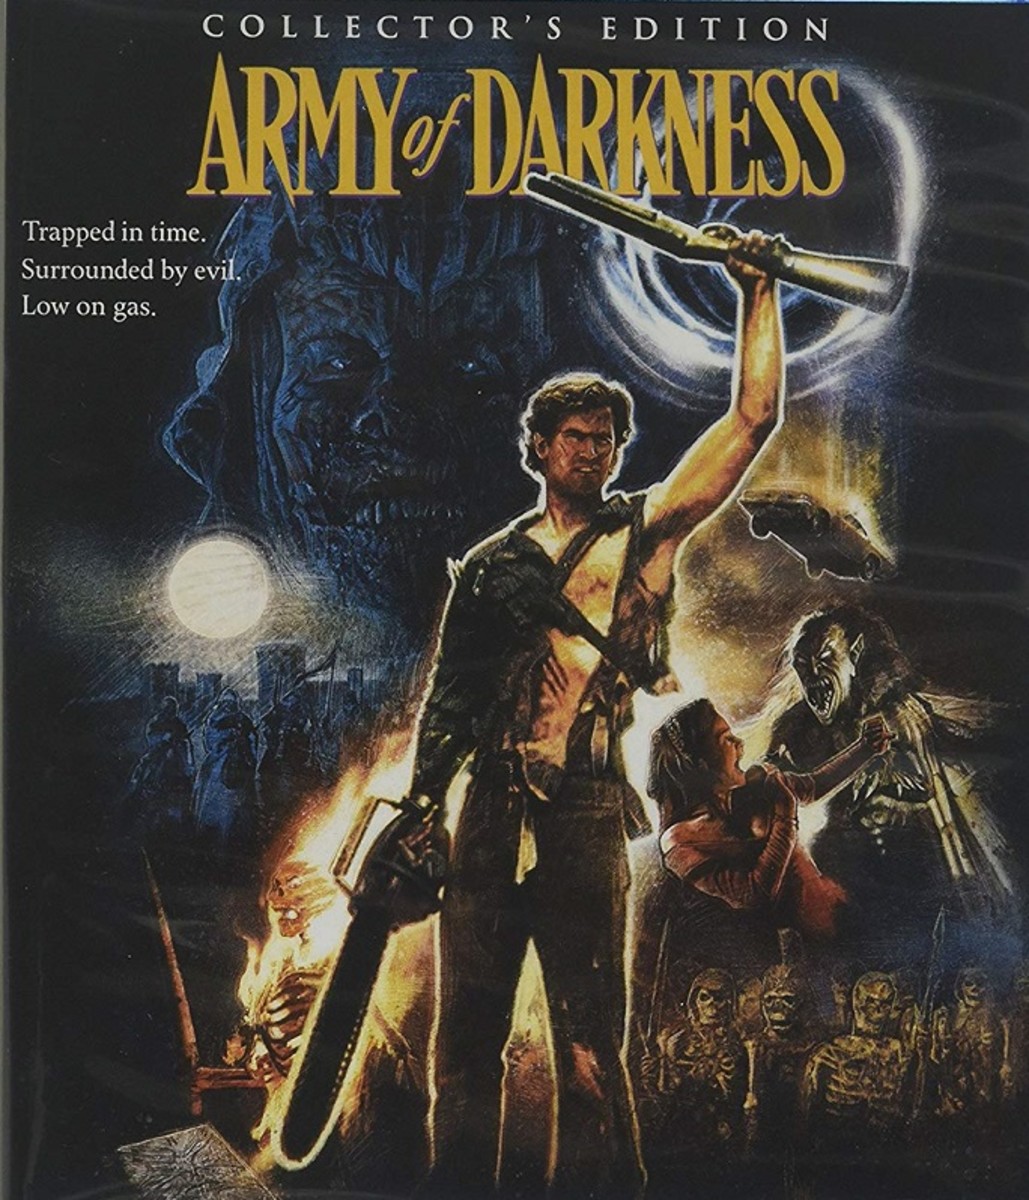 "Army of Darkness"